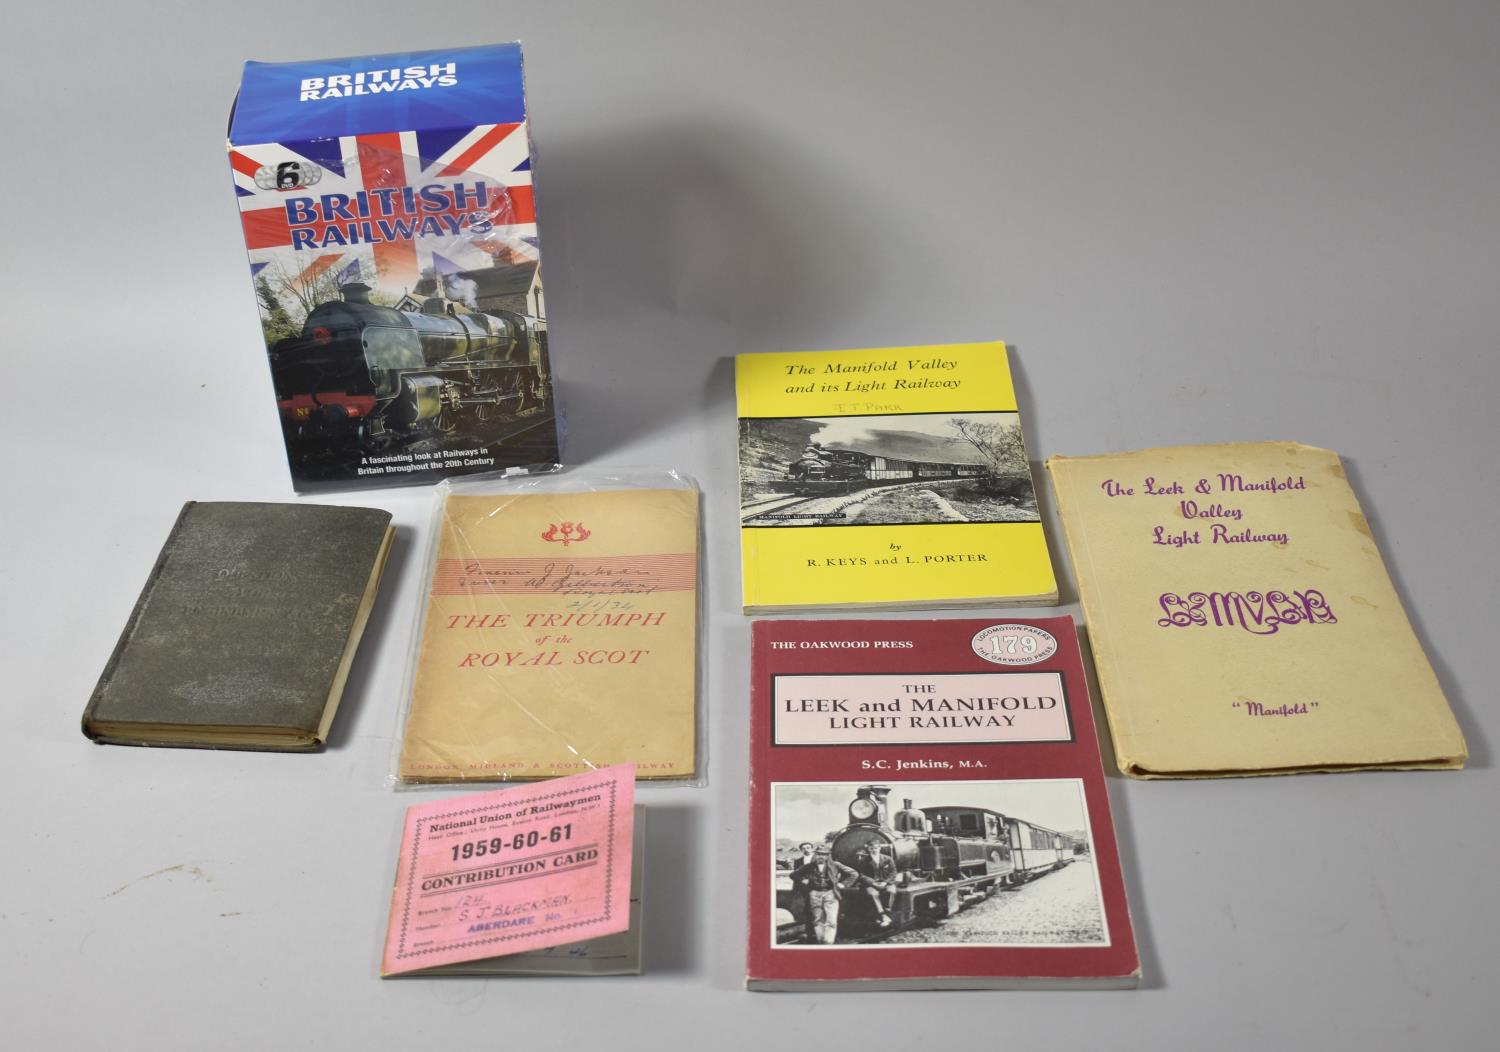 A Set of British Railways DVD's Together with Various Books, Pamphlets and Union Contribution Card